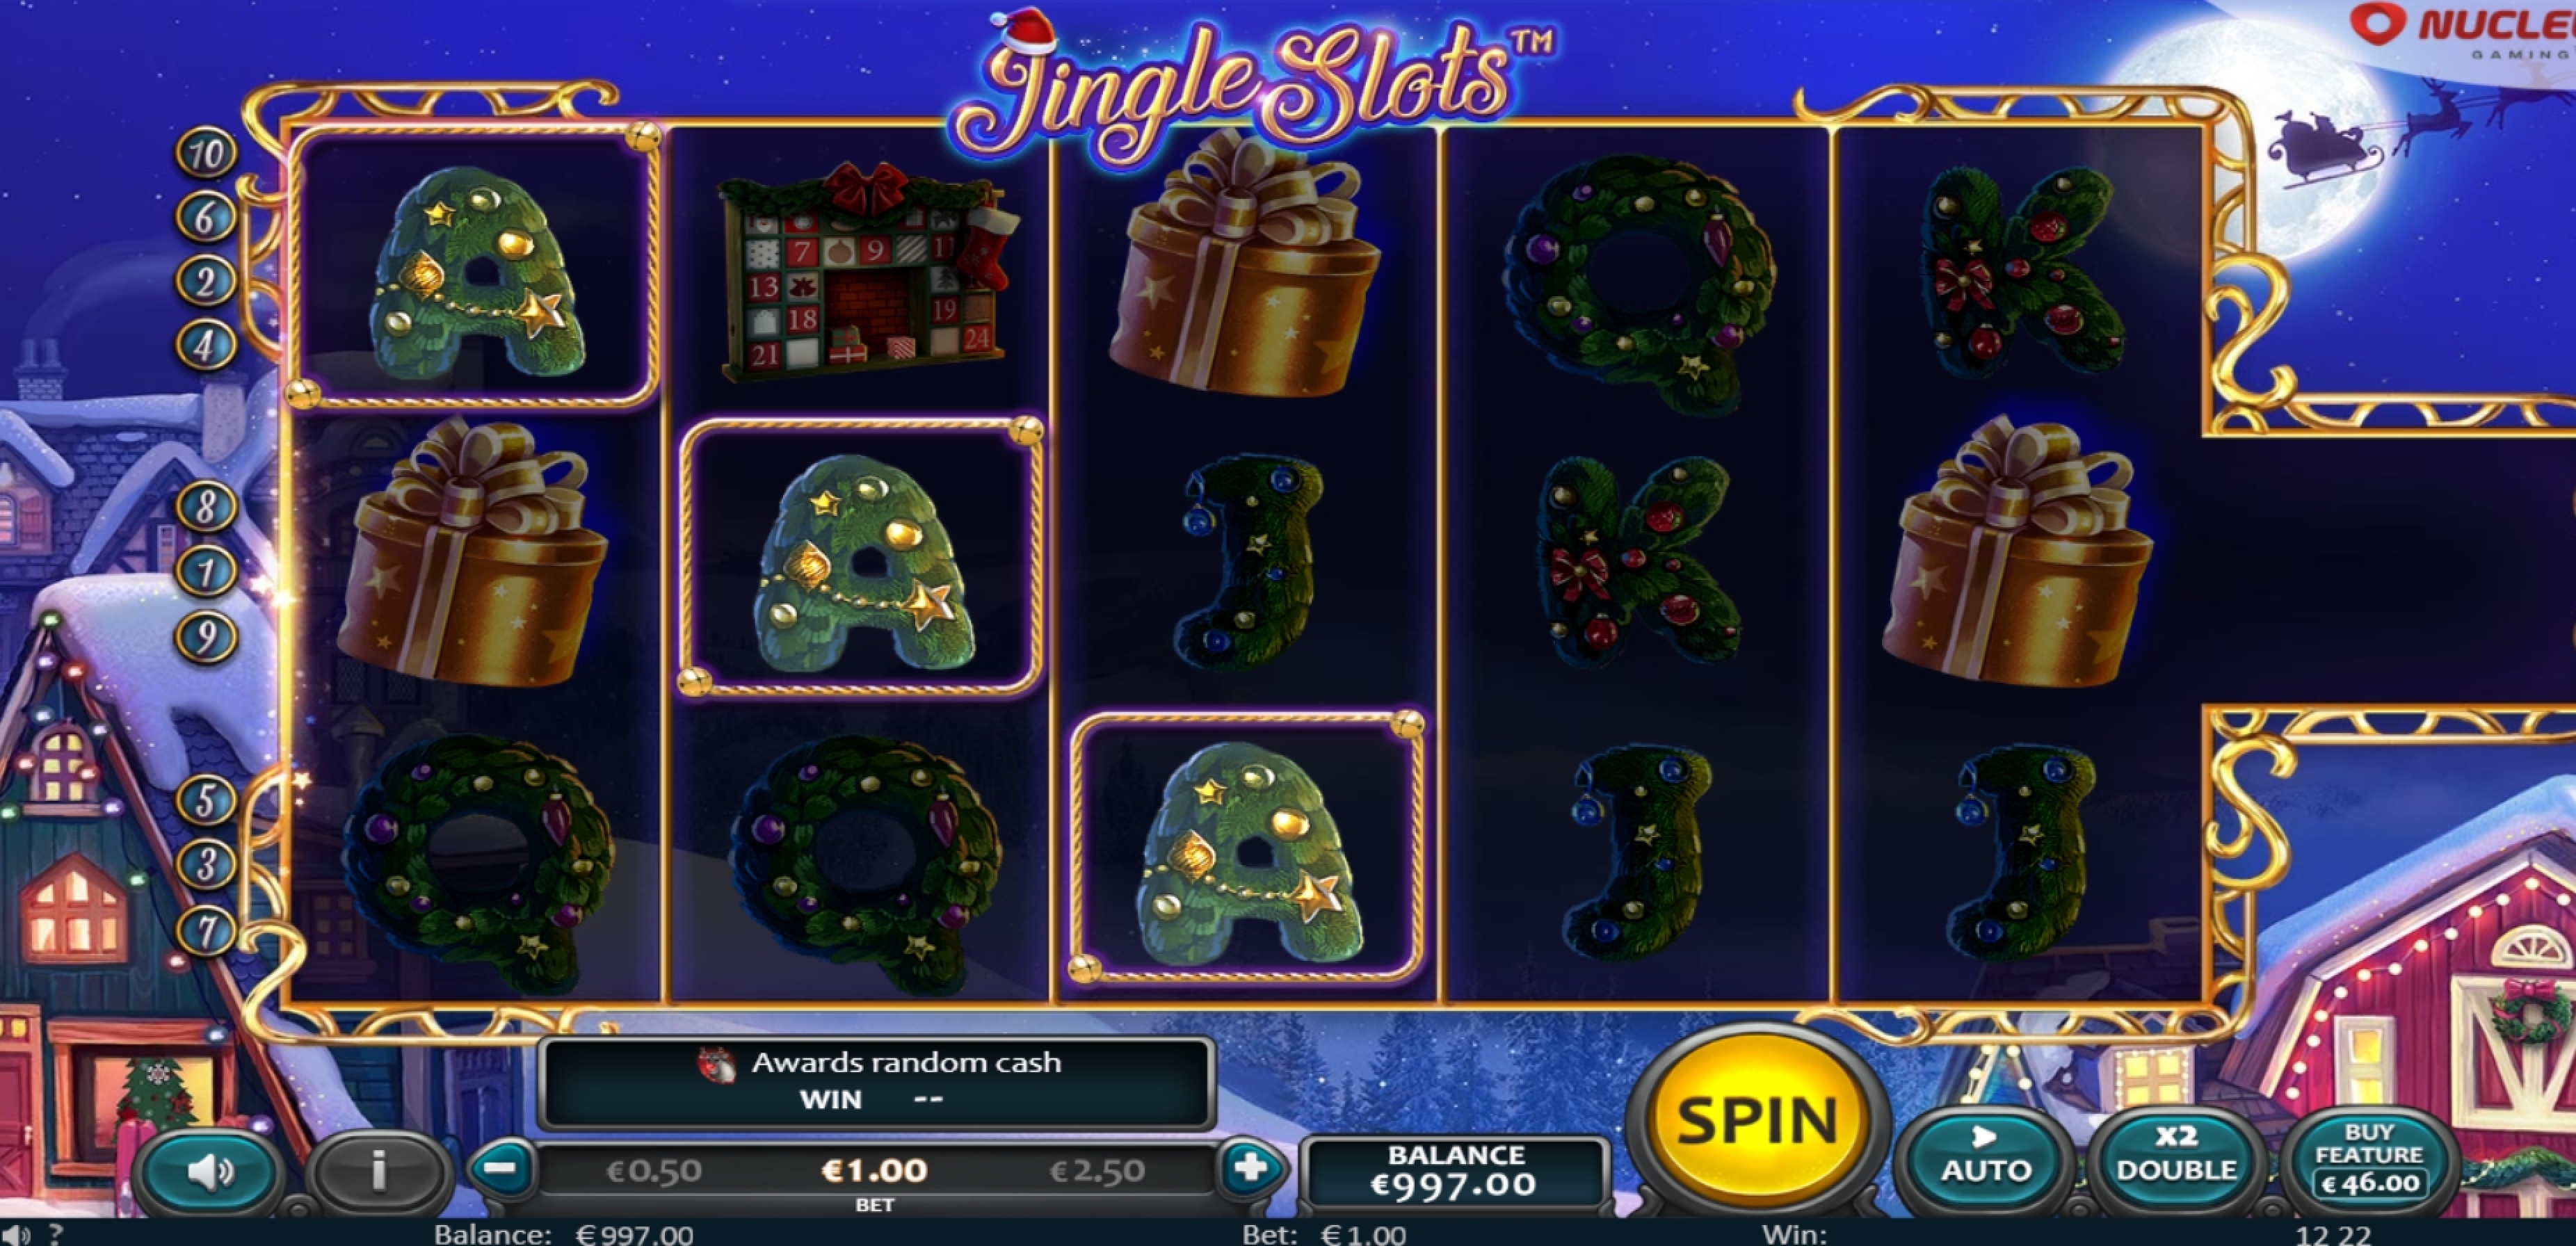 Win Money in Jingle Slots Free Slot Game by Nucleus Gaming